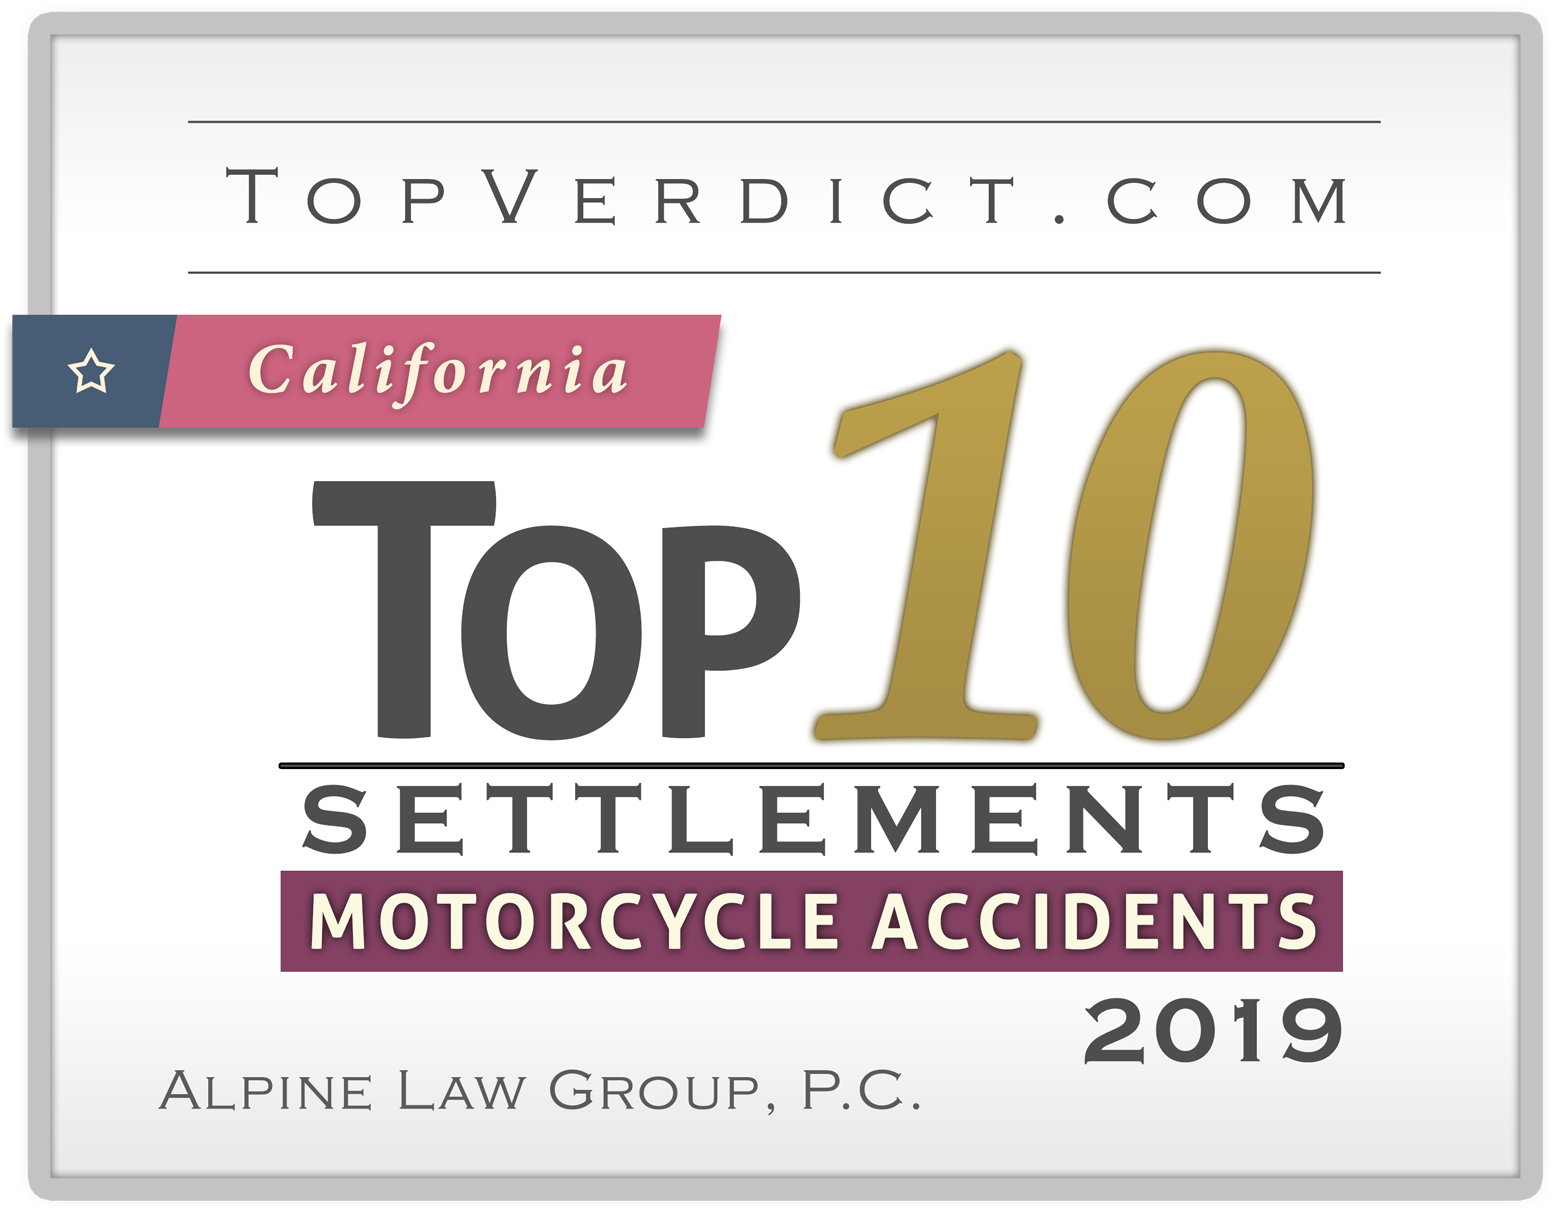 Top 10 Motorcycle Accident Settlements in California in 2019